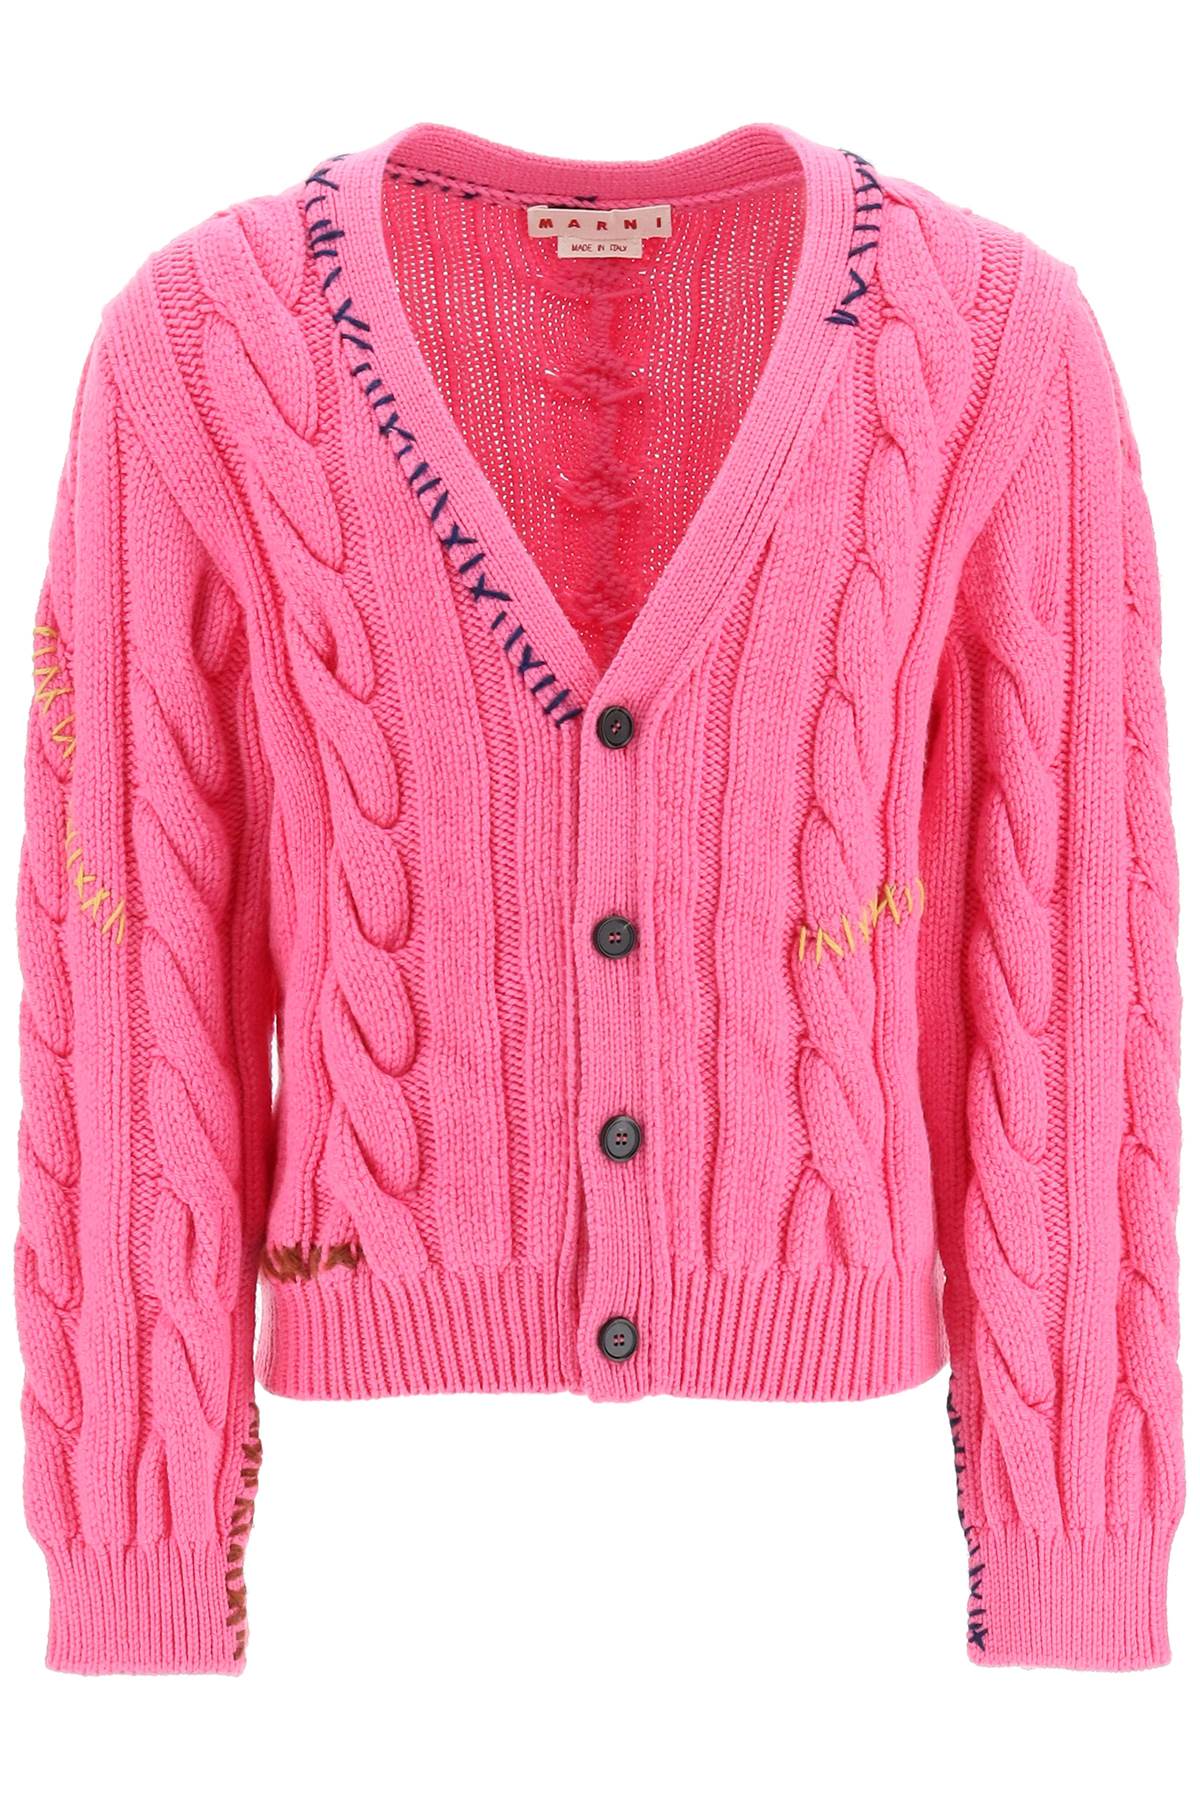 Marni Cable Knit Cardigan With Stitchings